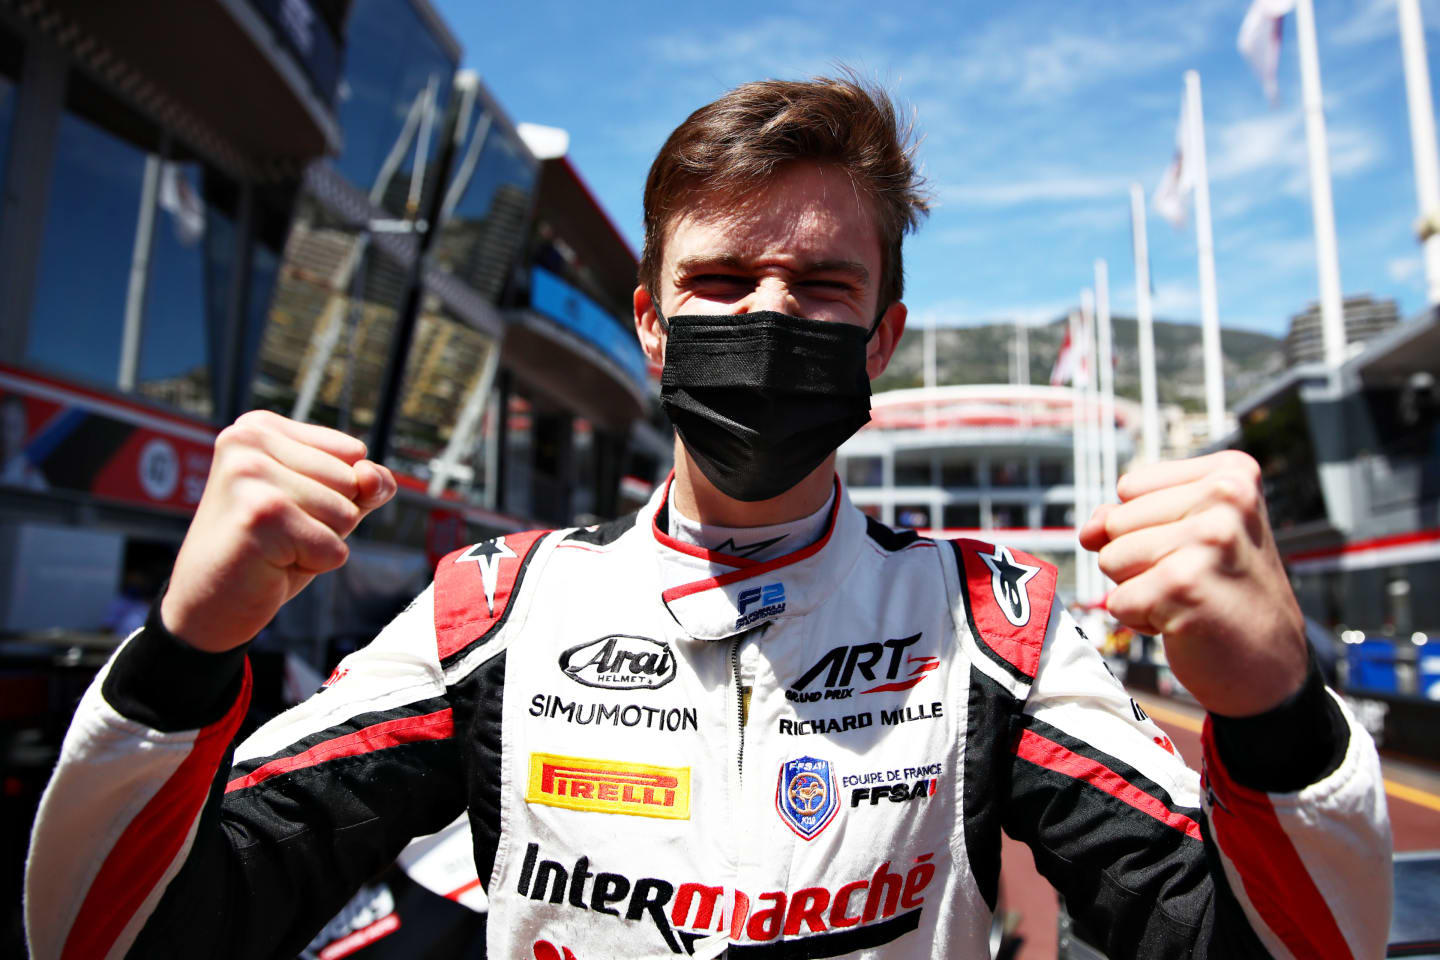 MONTE-CARLO, MONACO - MAY 20: Pole position qualifier Theo Pourchaire of France and ART Grand Prix